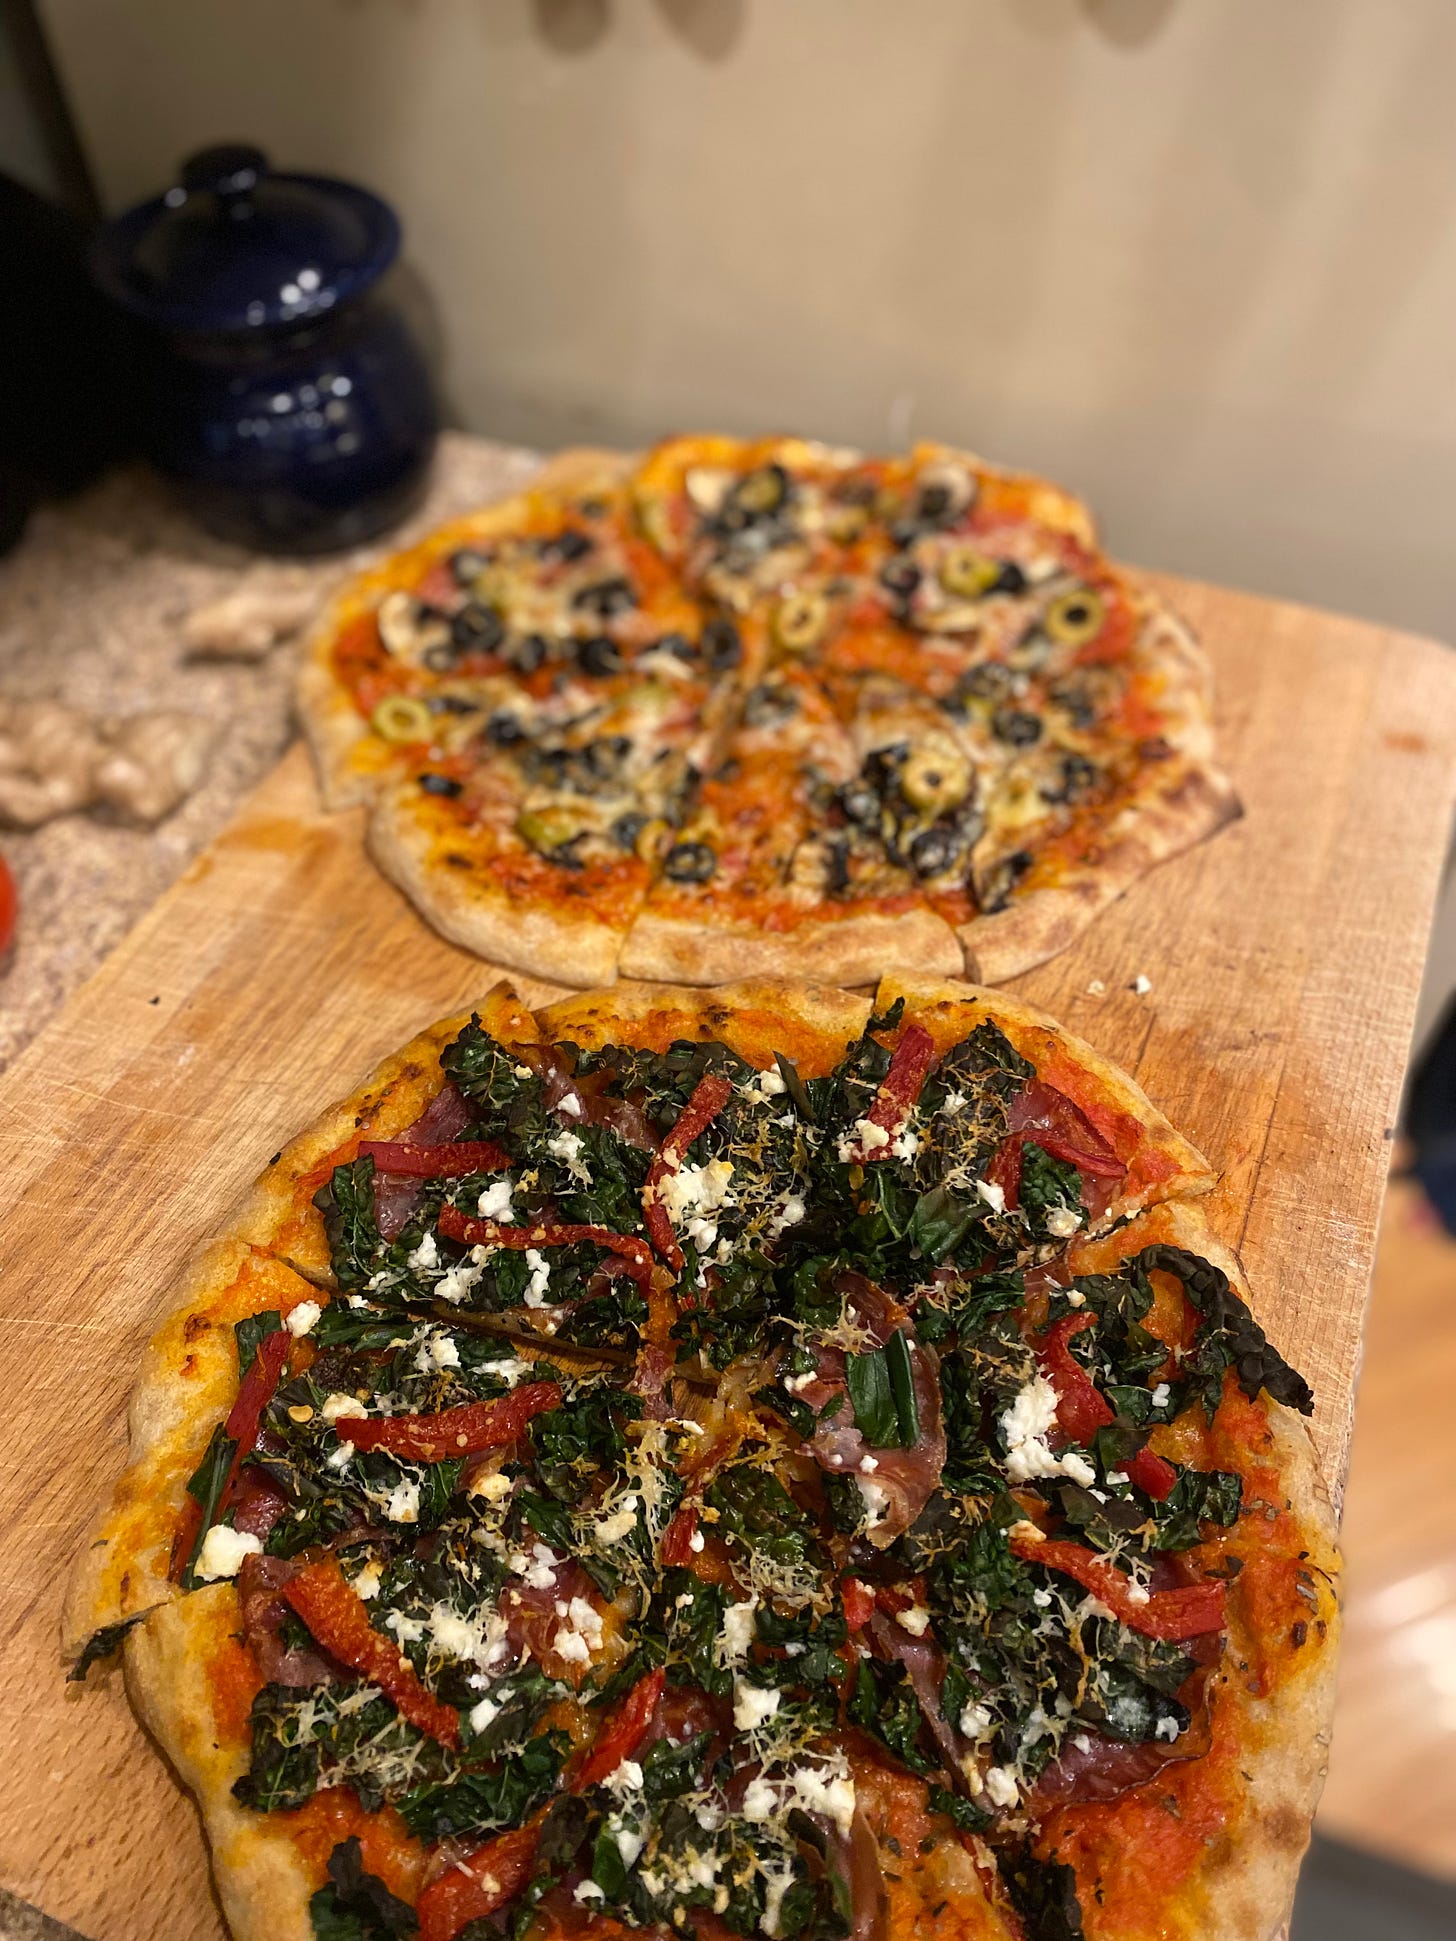 The pizzas described above, sliced into eighths on a cutting board. The kale pizza is in the foreground, the olive a little blurred in the back.